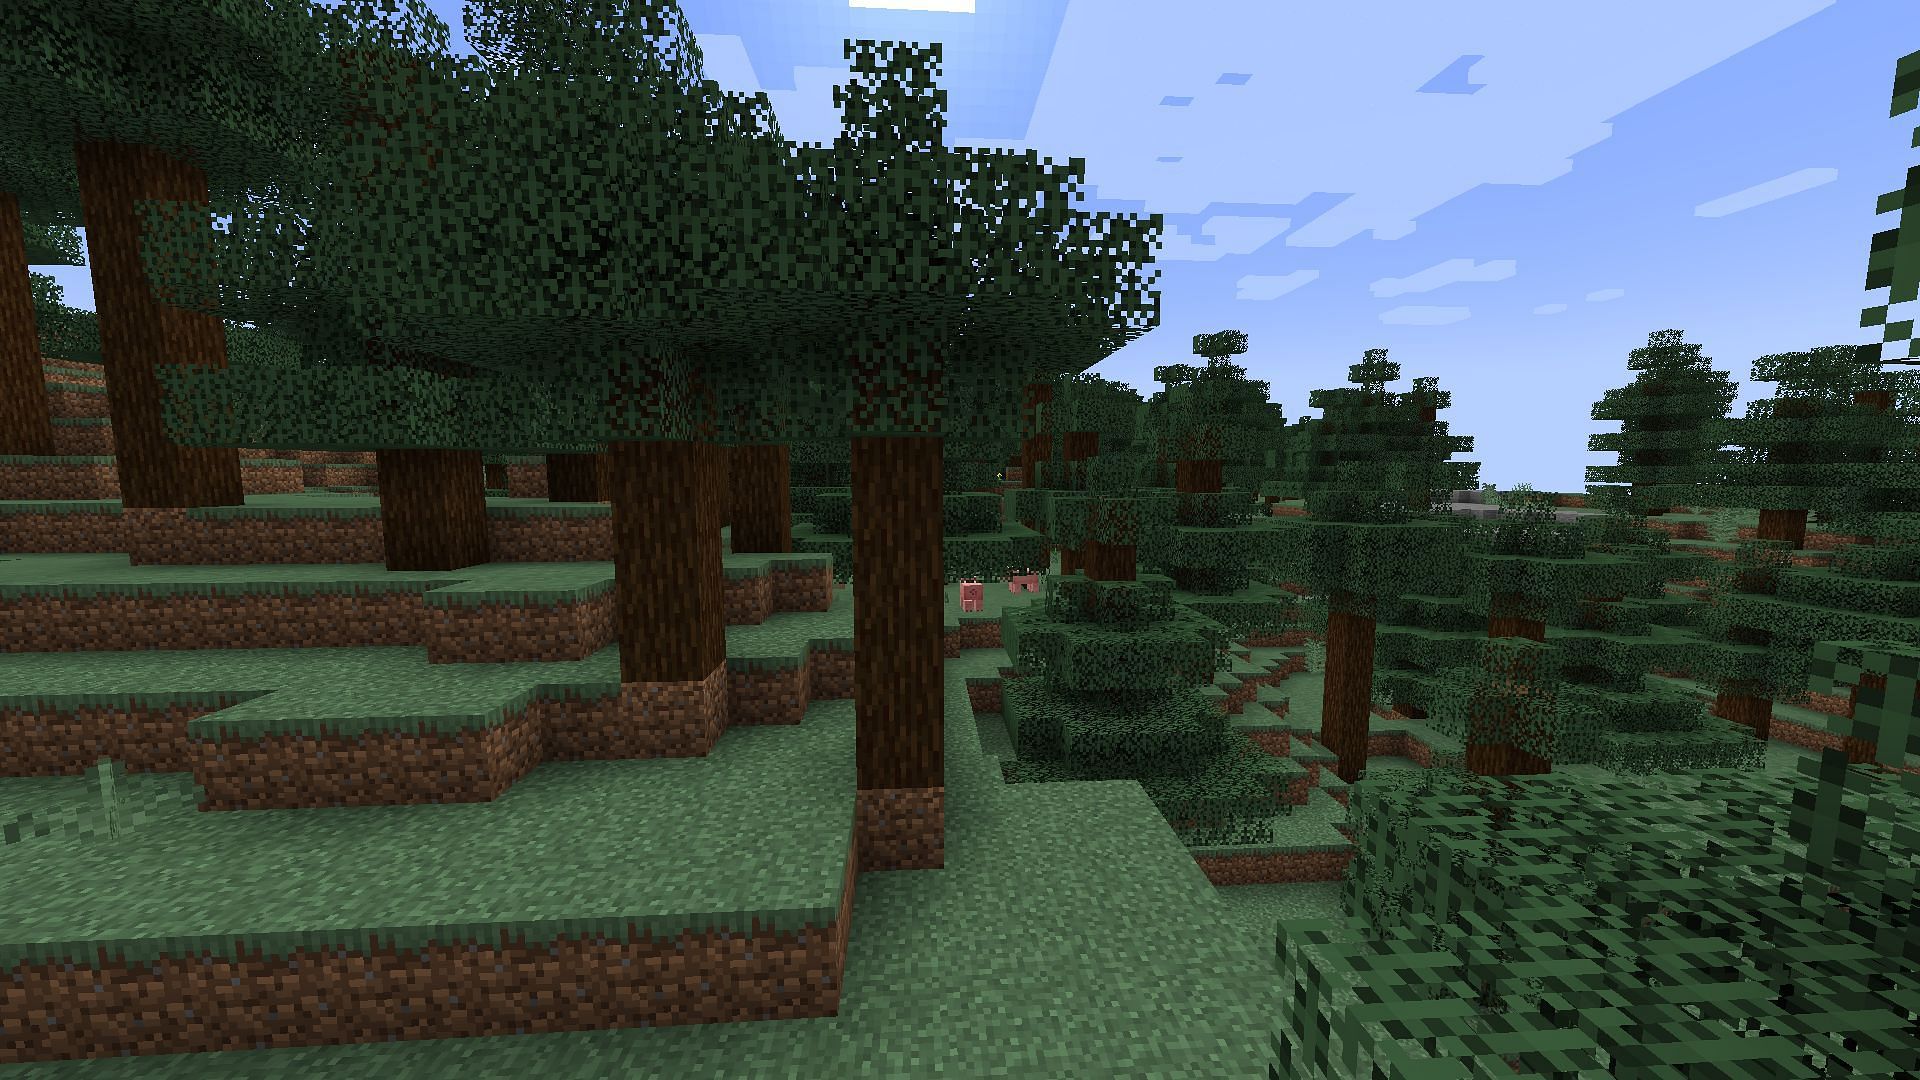 Spruce Forest in Minecraft (Image via Mojang)